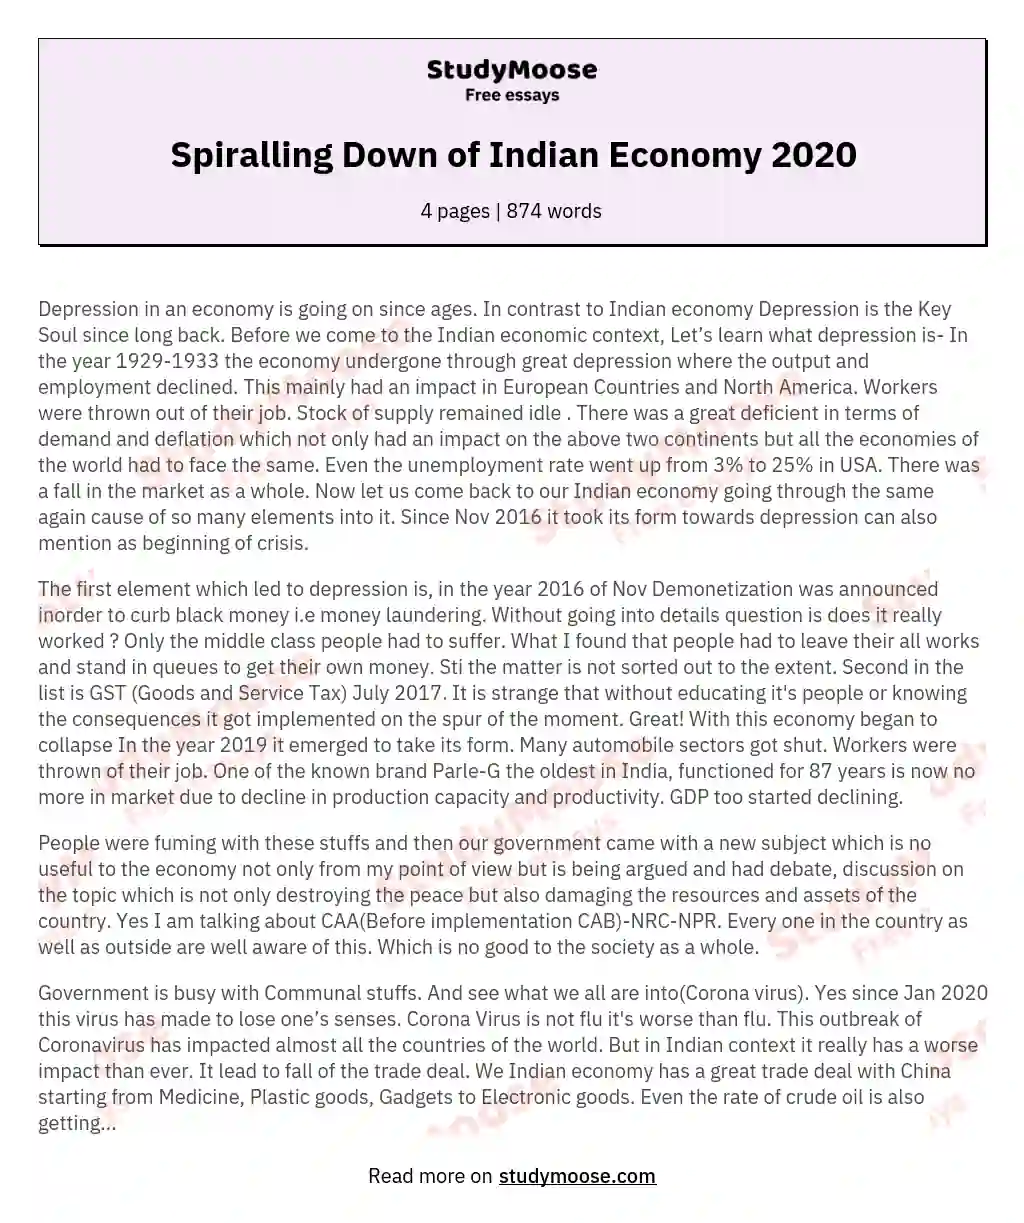 Spiralling Down of Indian Economy 2020